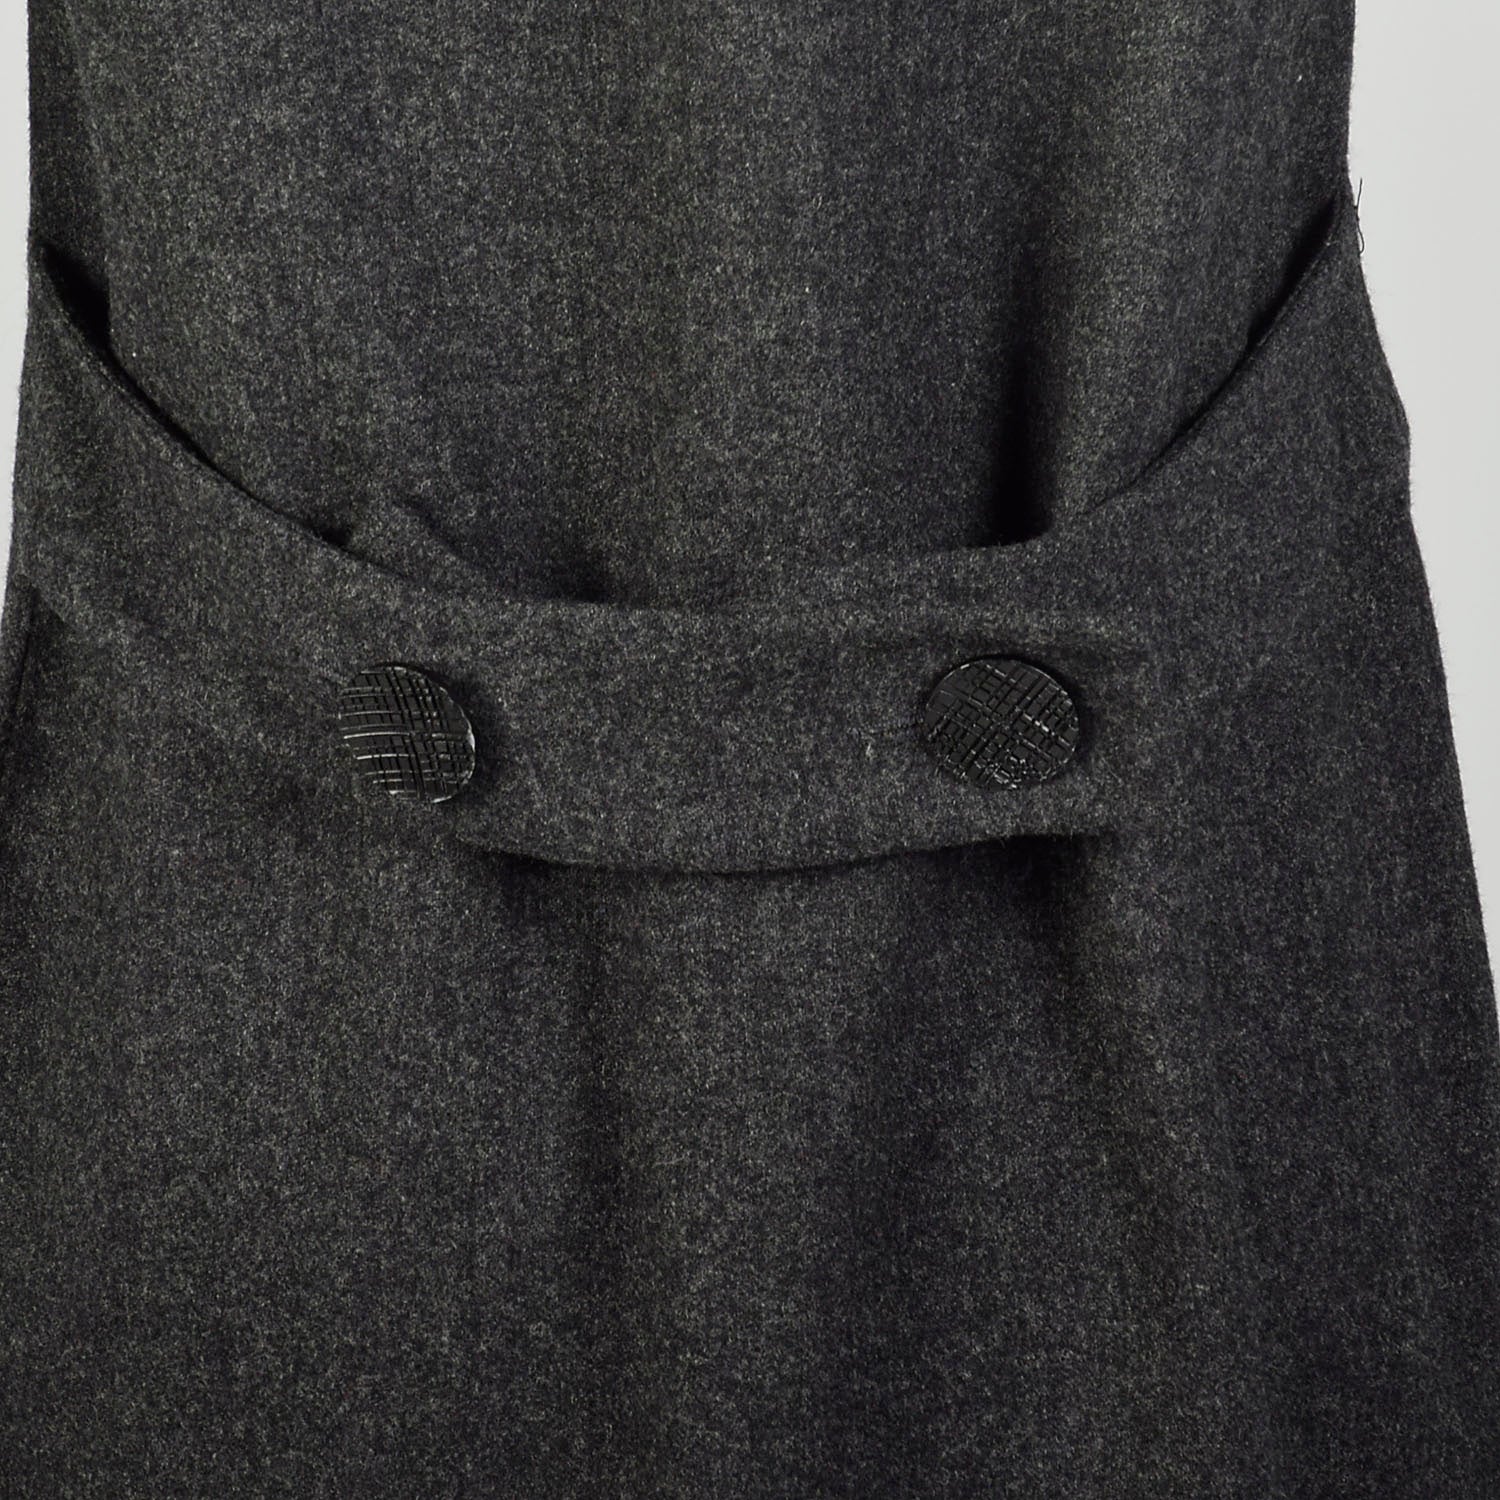 Medium 1960s Wool Dress Gray Double Breasted Casual